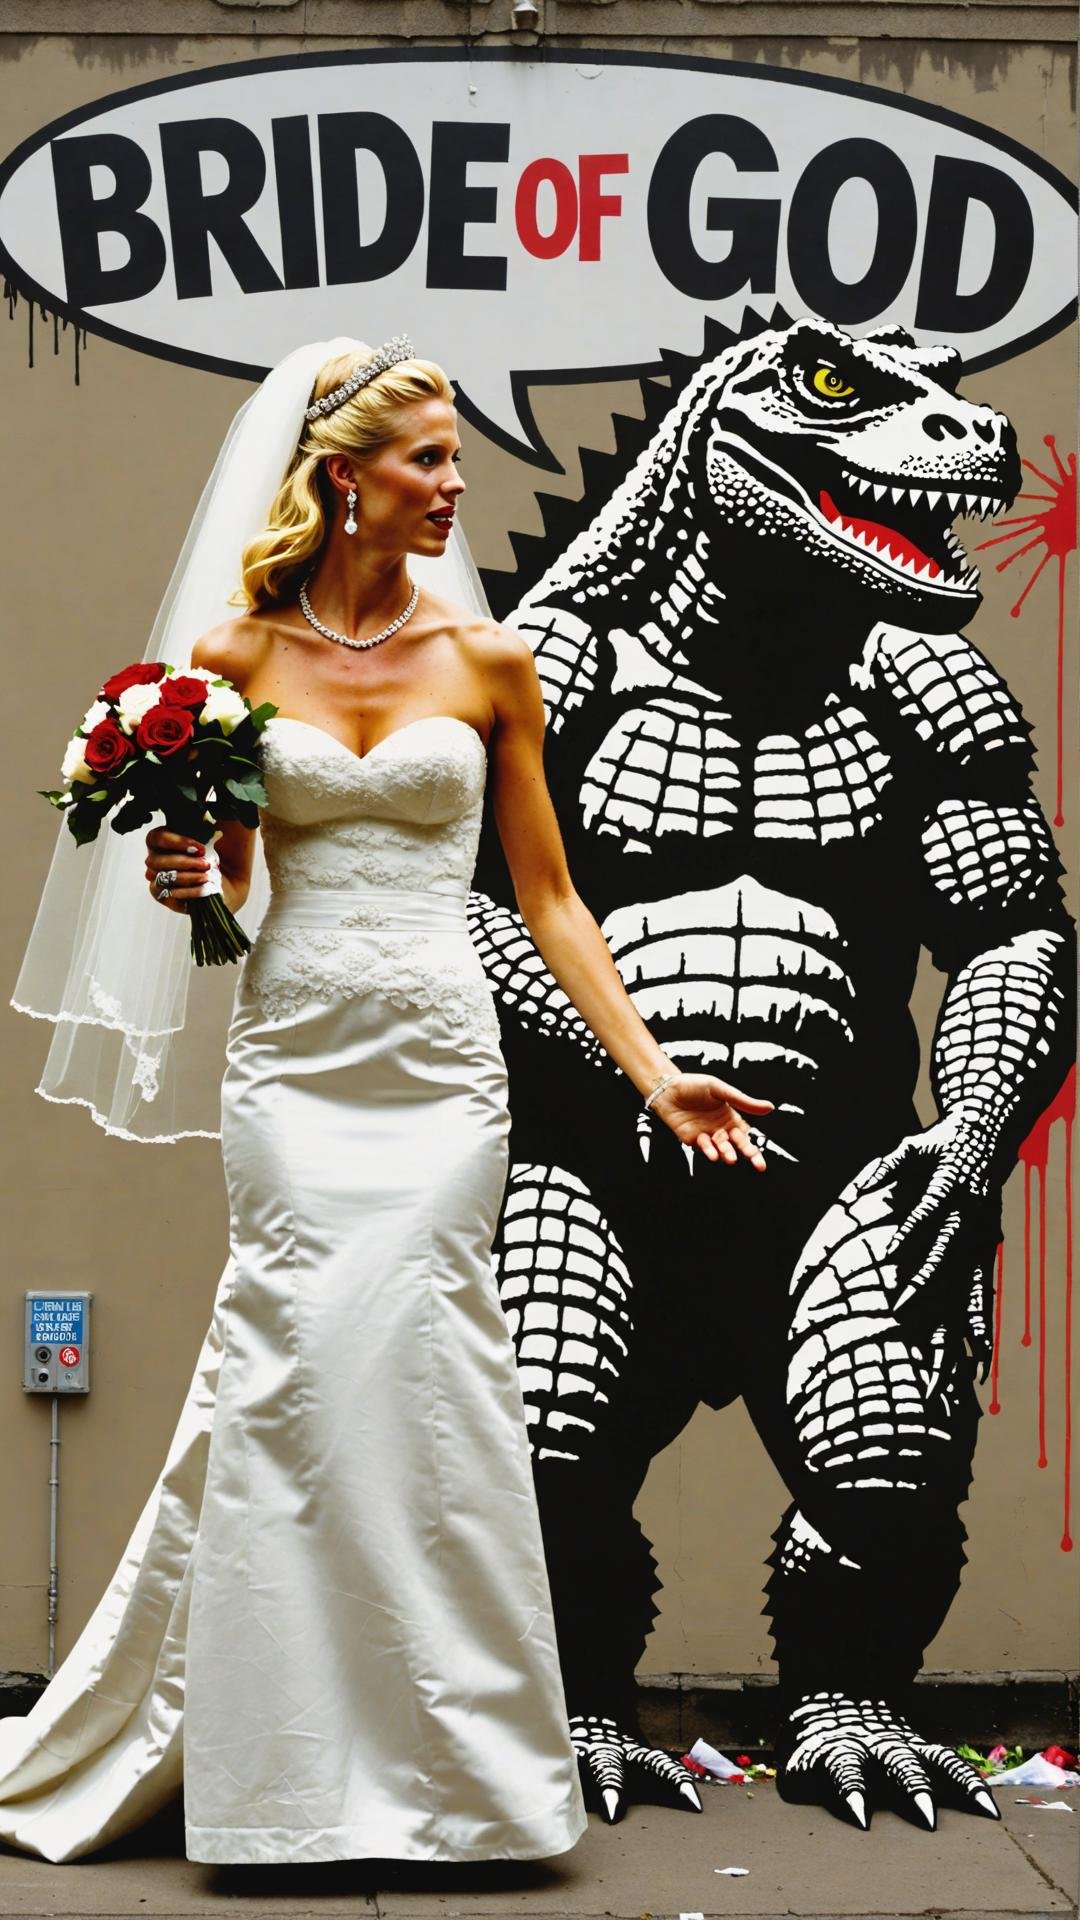 Banksy graffiti of blonde supermodel bride zilla and Godzilla getting married with text bubble that says "bride of god"